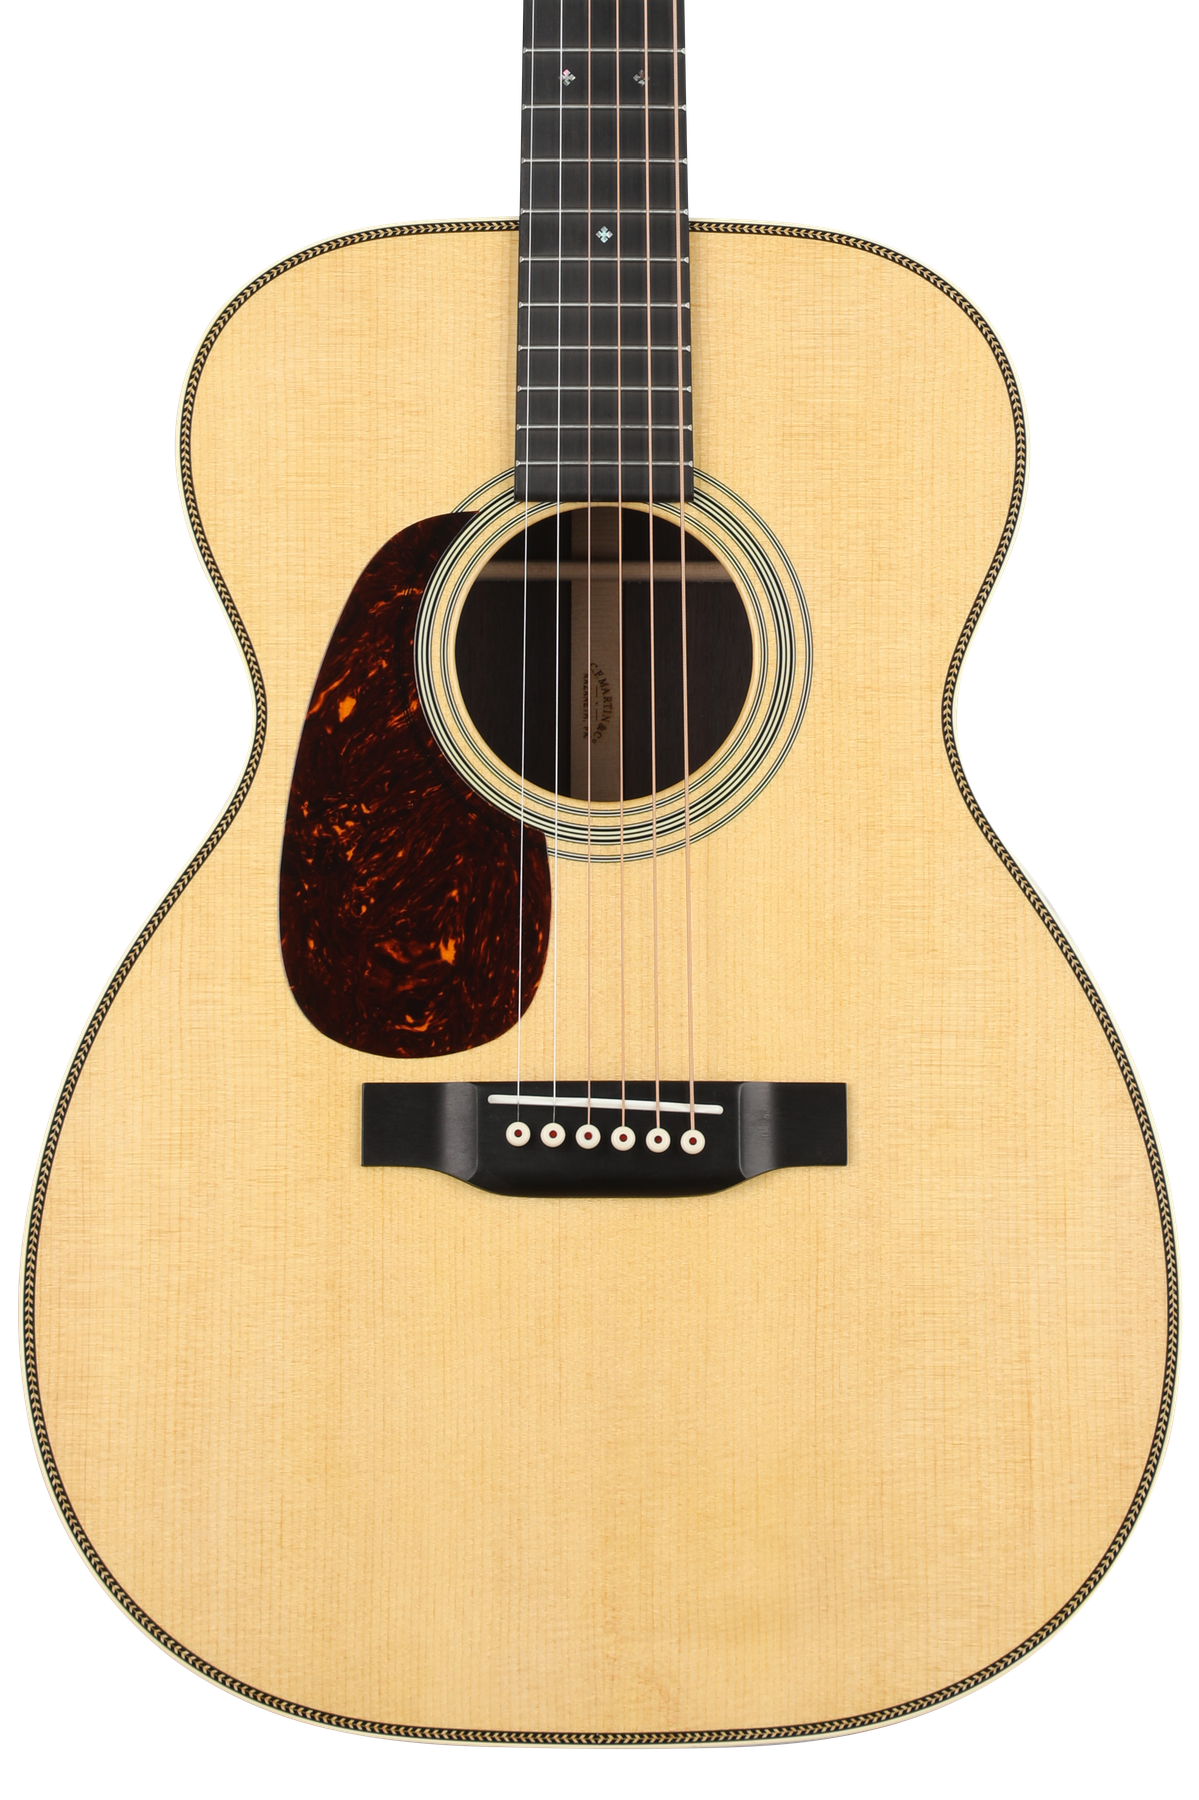 Martin 00-28 Left-Handed Acoustic Guitar - Natural | Sweetwater